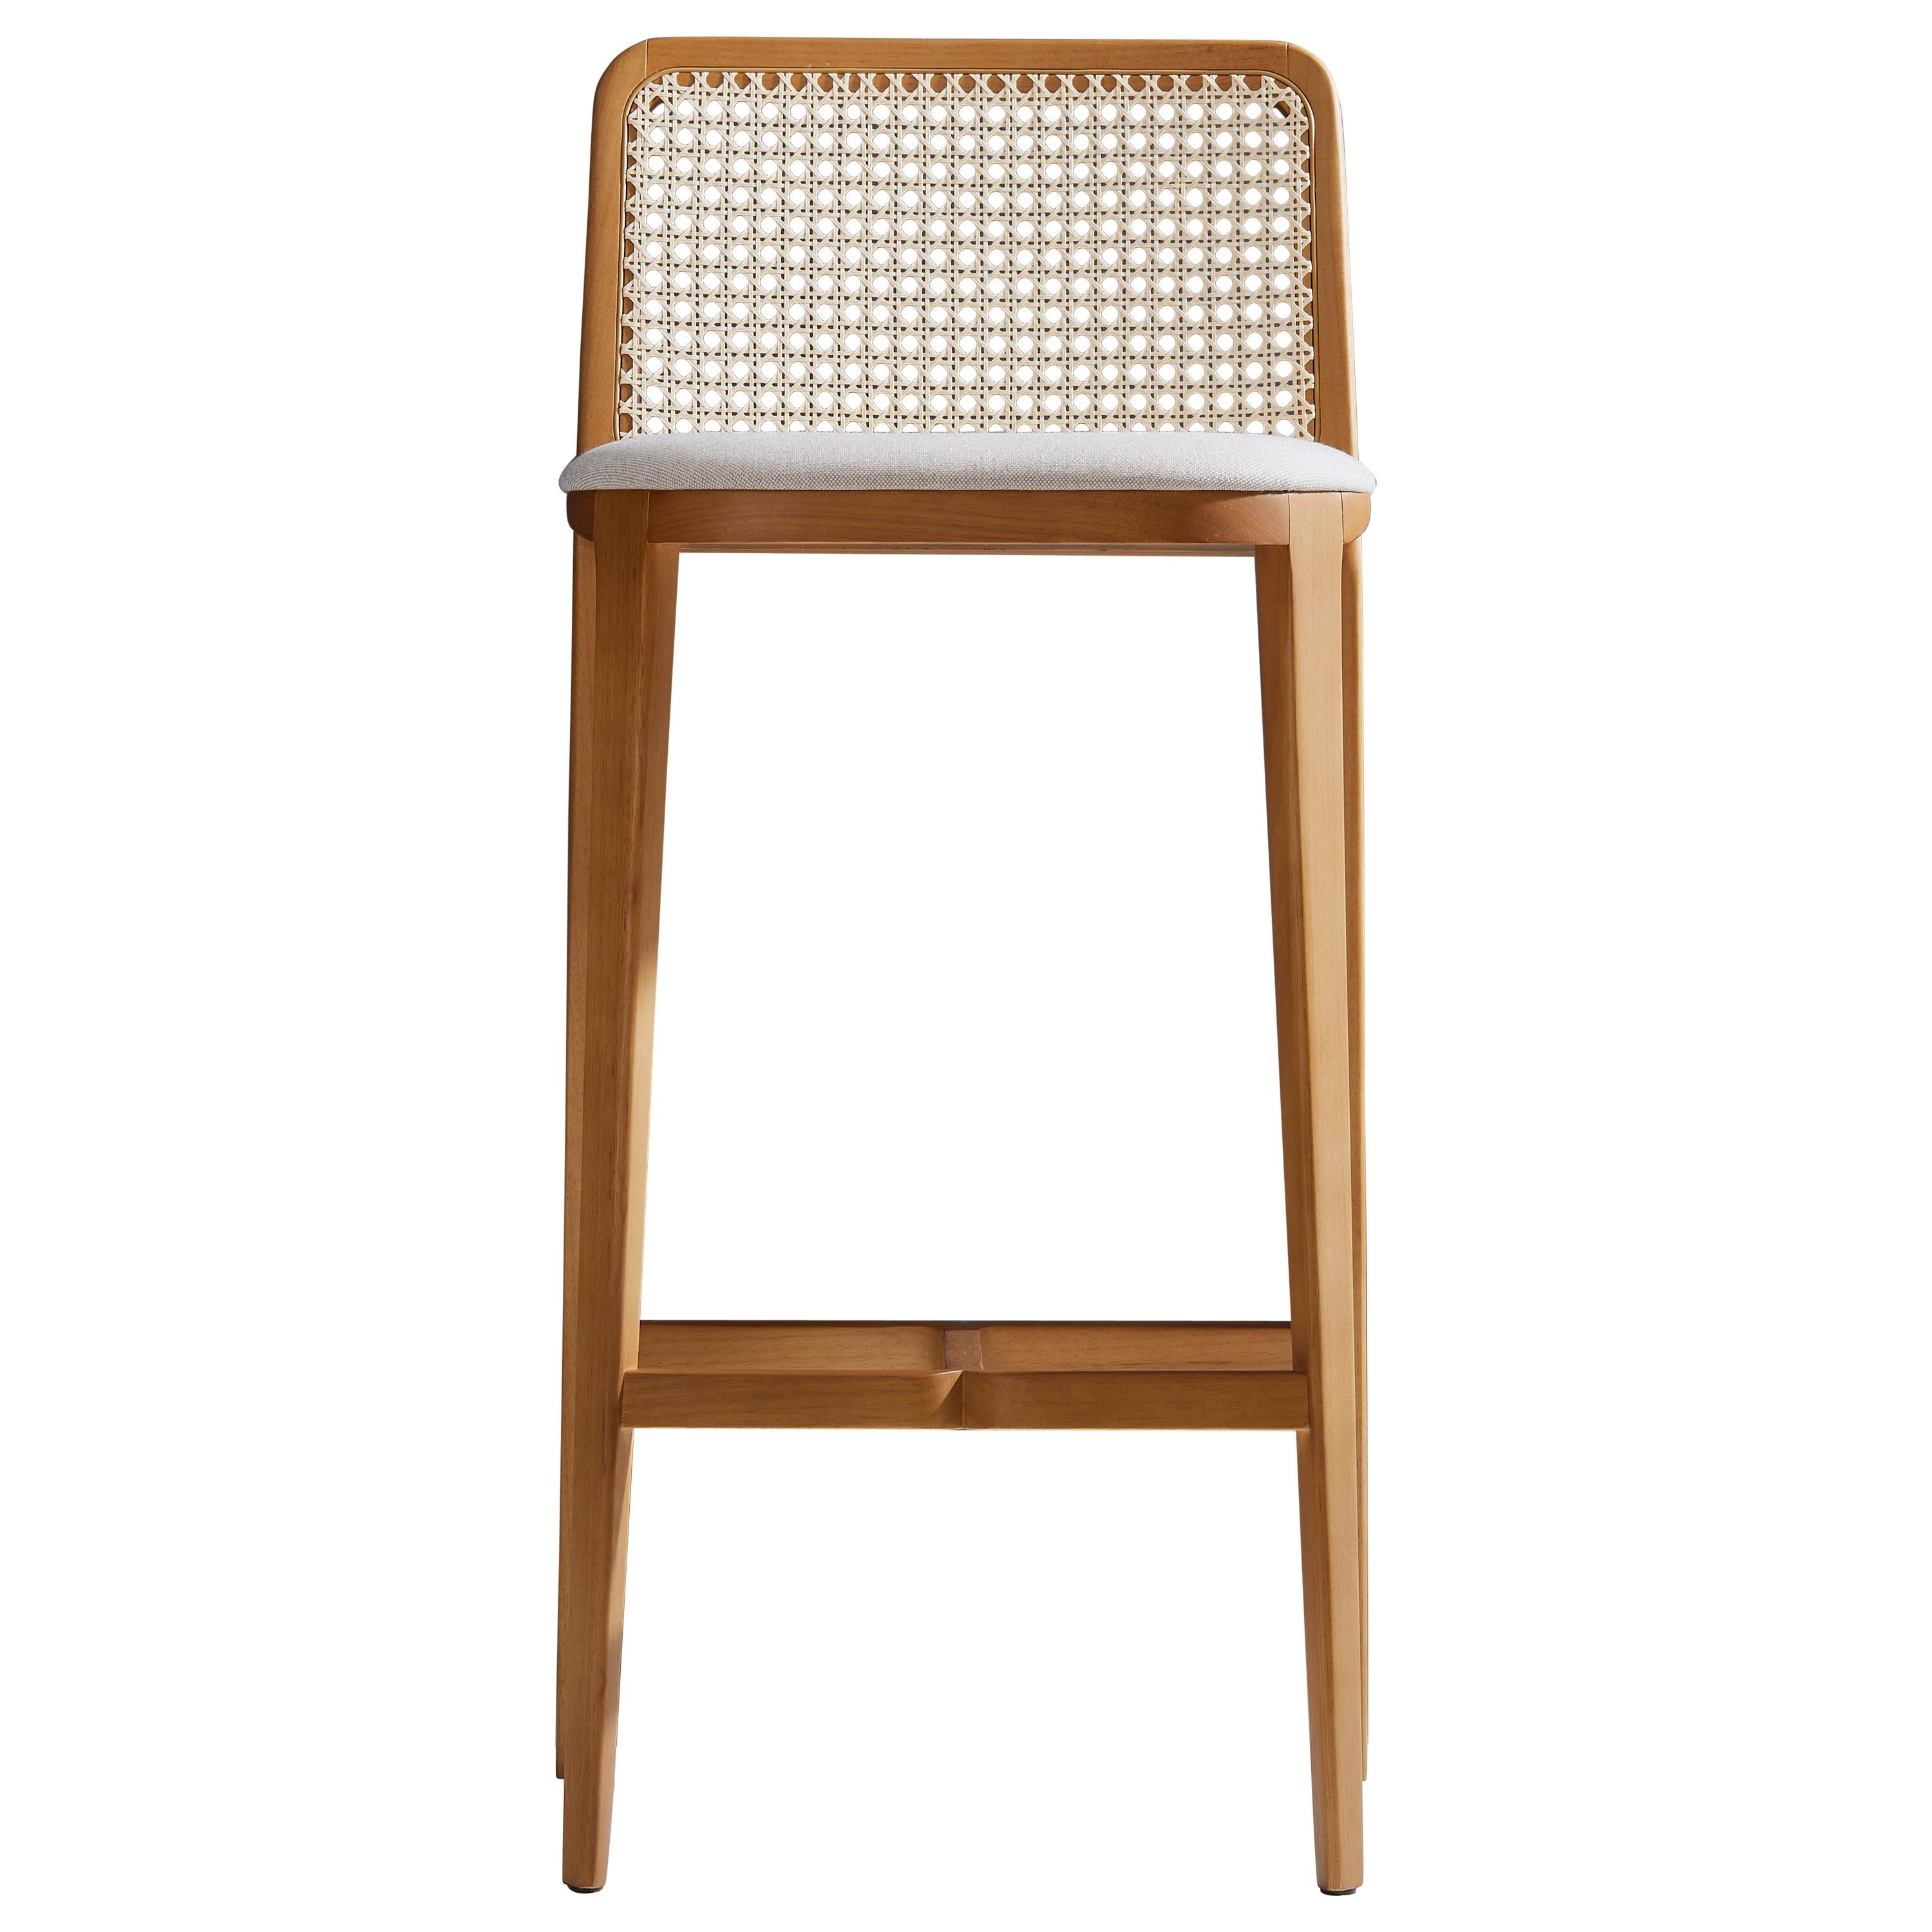 Minimal Style, Solid Wood Stool, Textiles or Leather Seatings, Caning Backboard